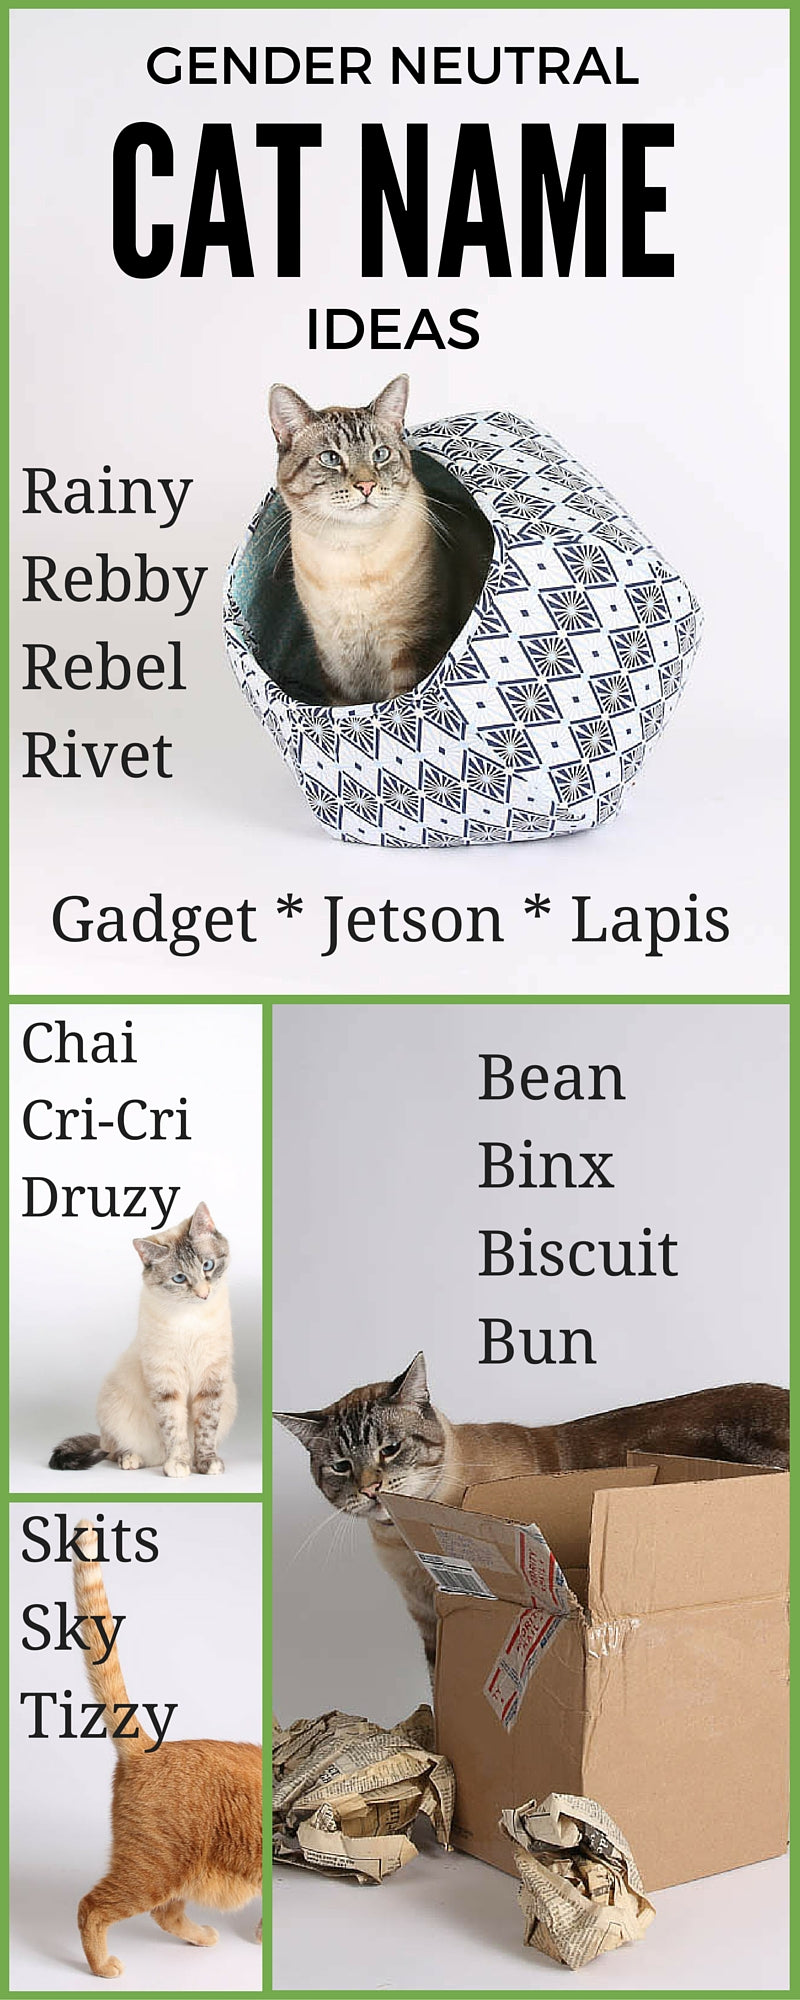 Cat Name Ideas that are Gender Neutral | The Cat Ball